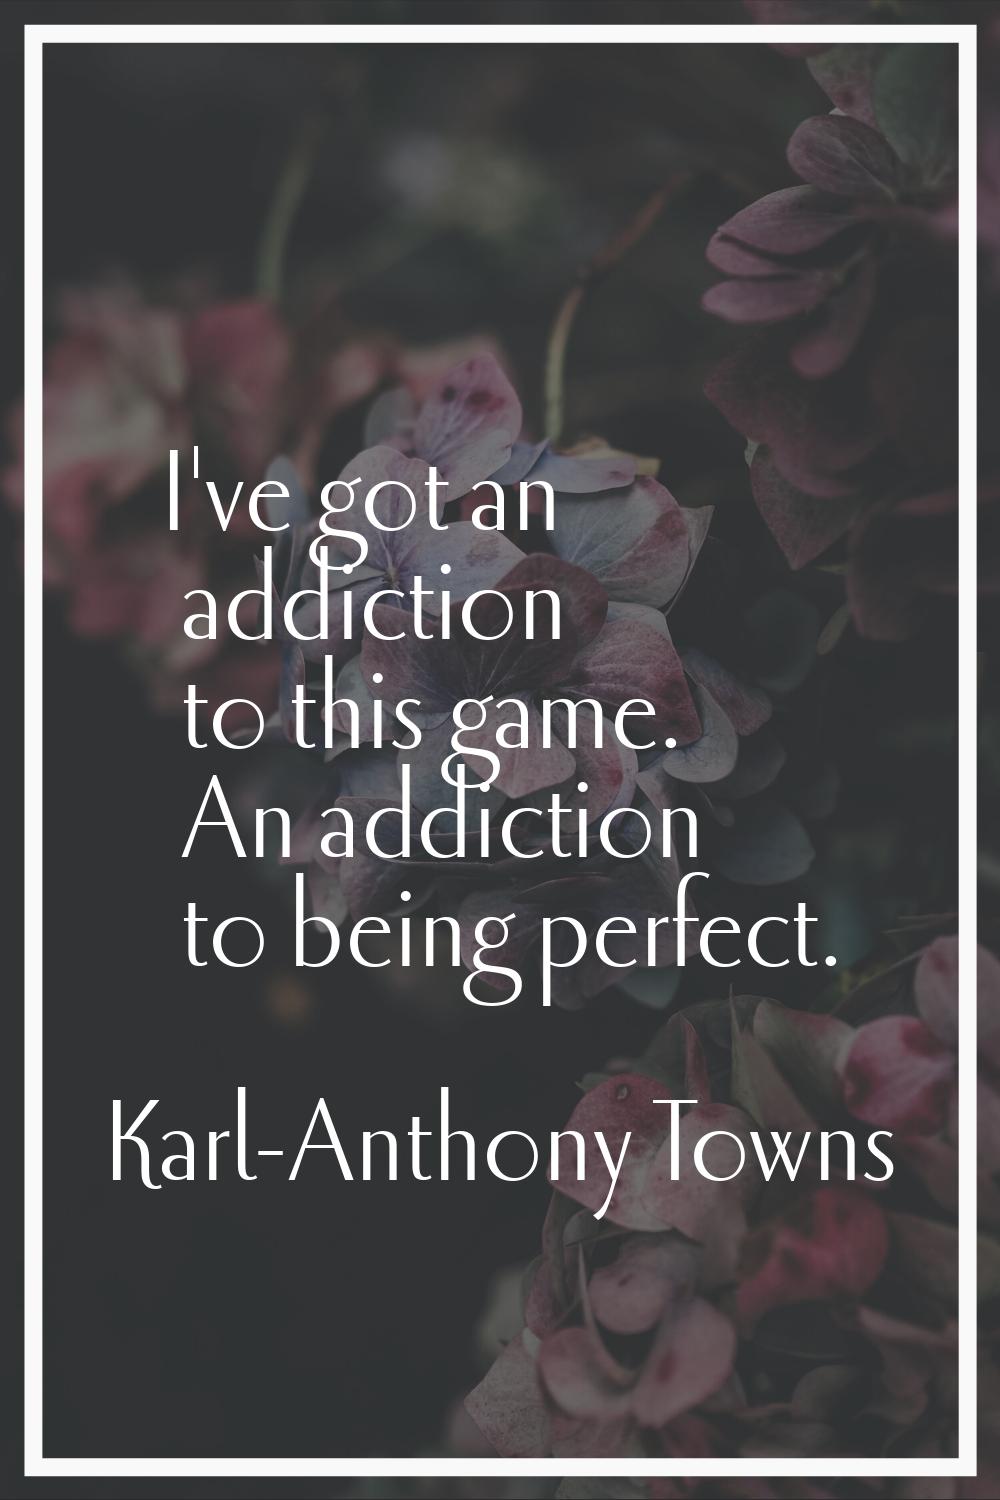 I've got an addiction to this game. An addiction to being perfect.